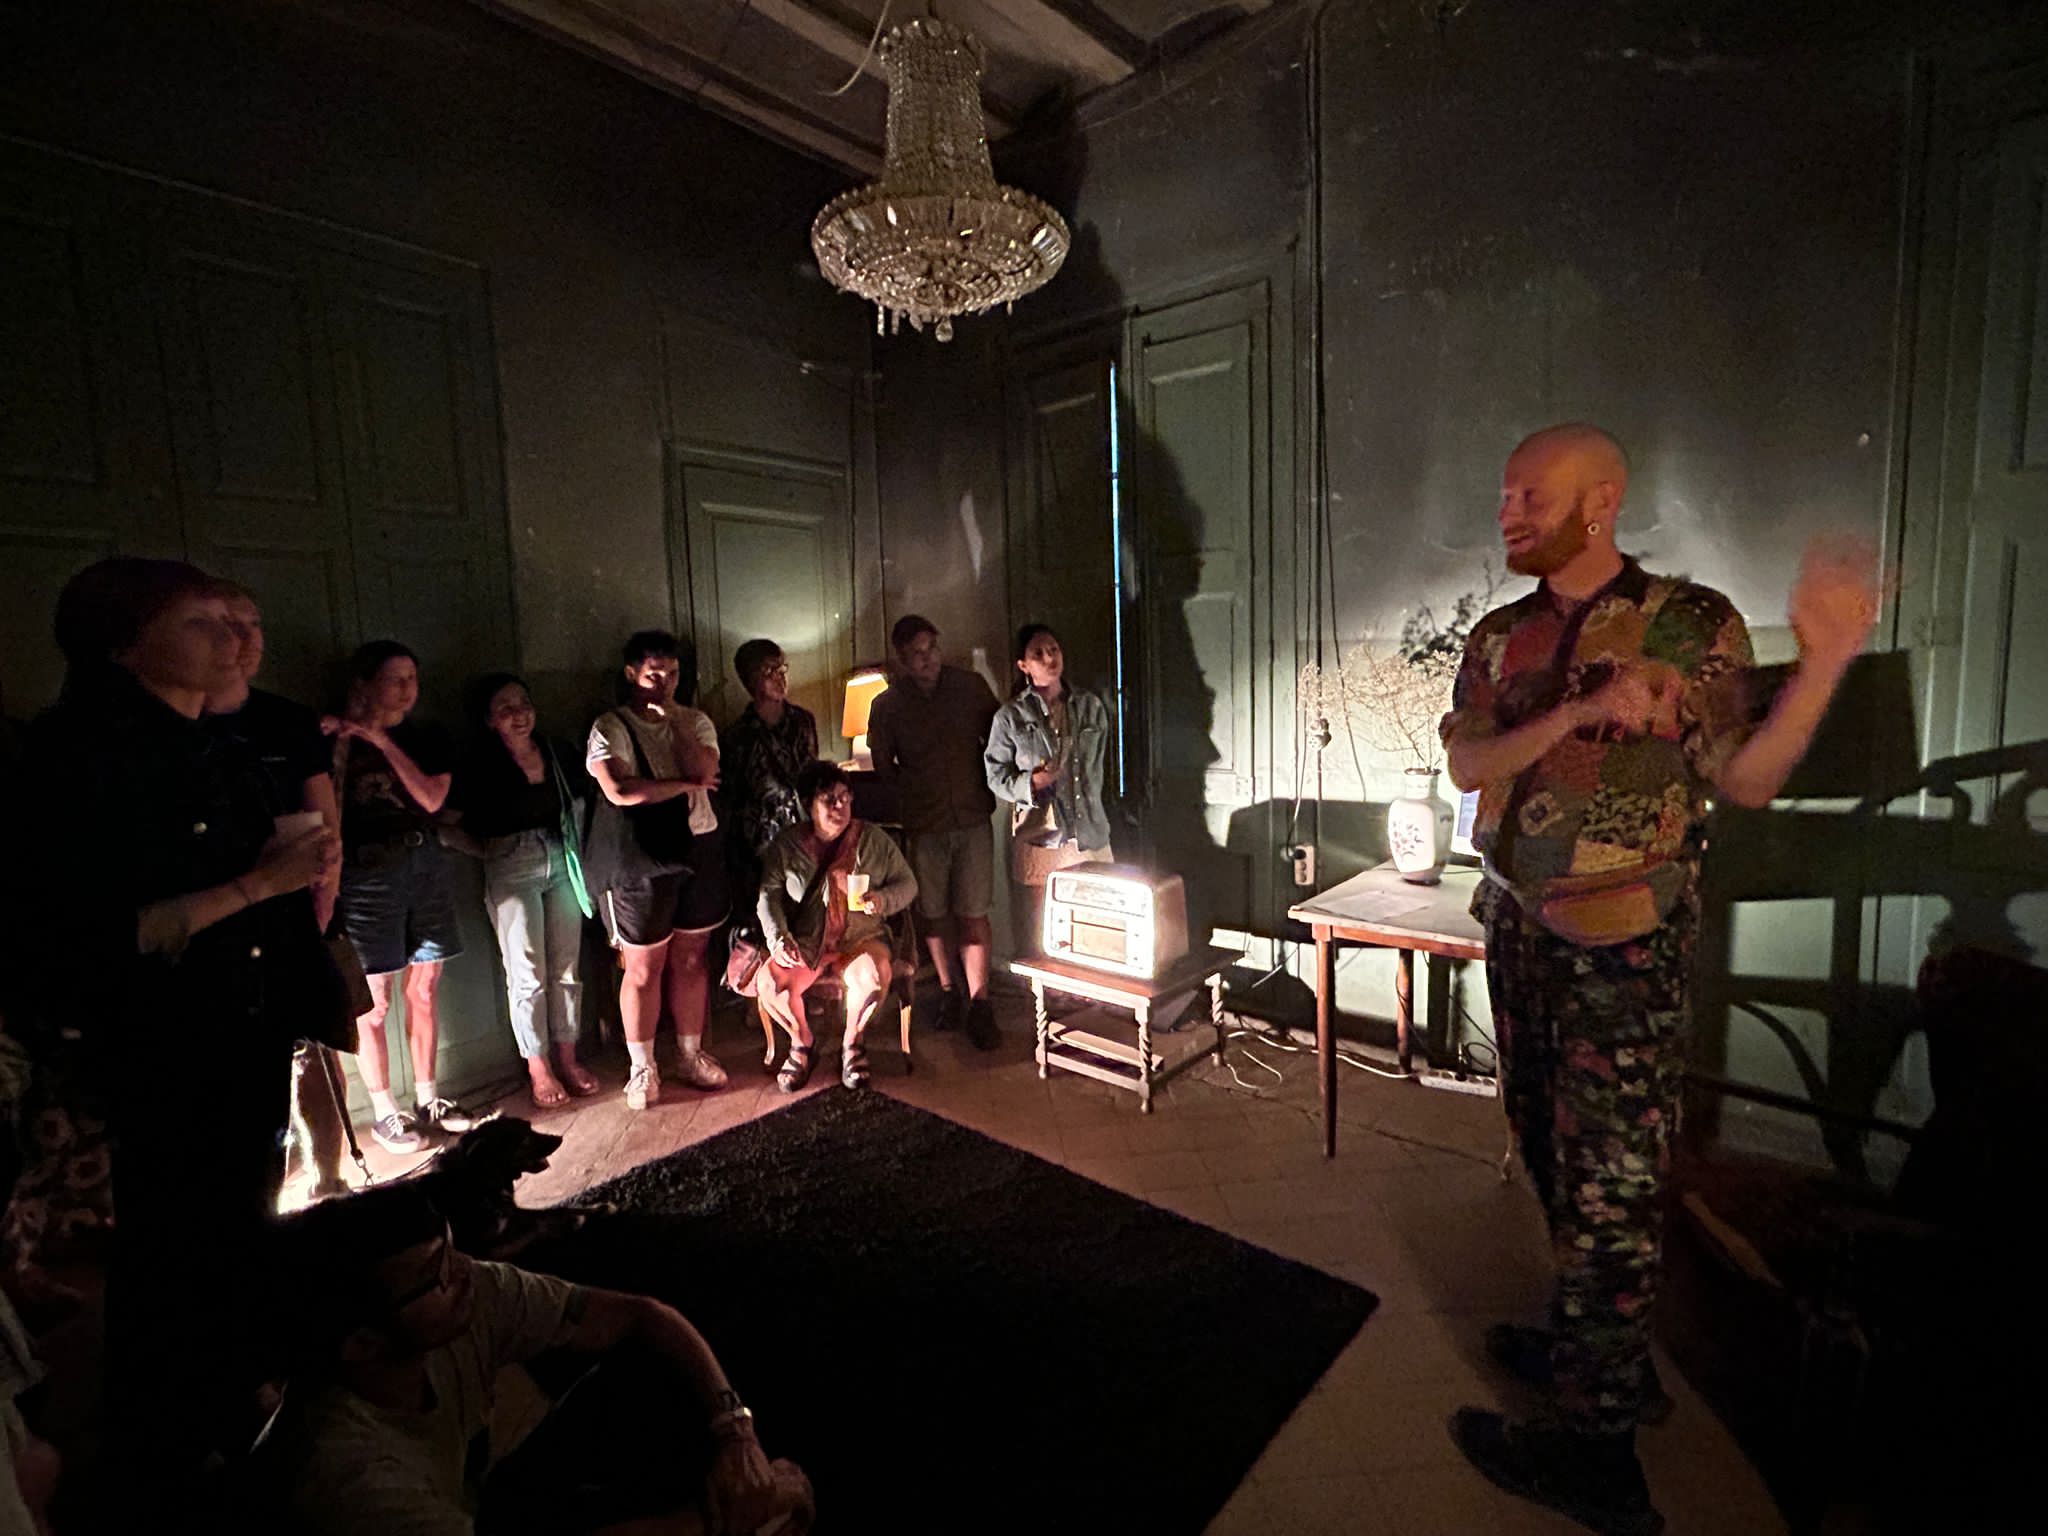 Photograph of vitling discussing the installation with a visiting exhibition audience